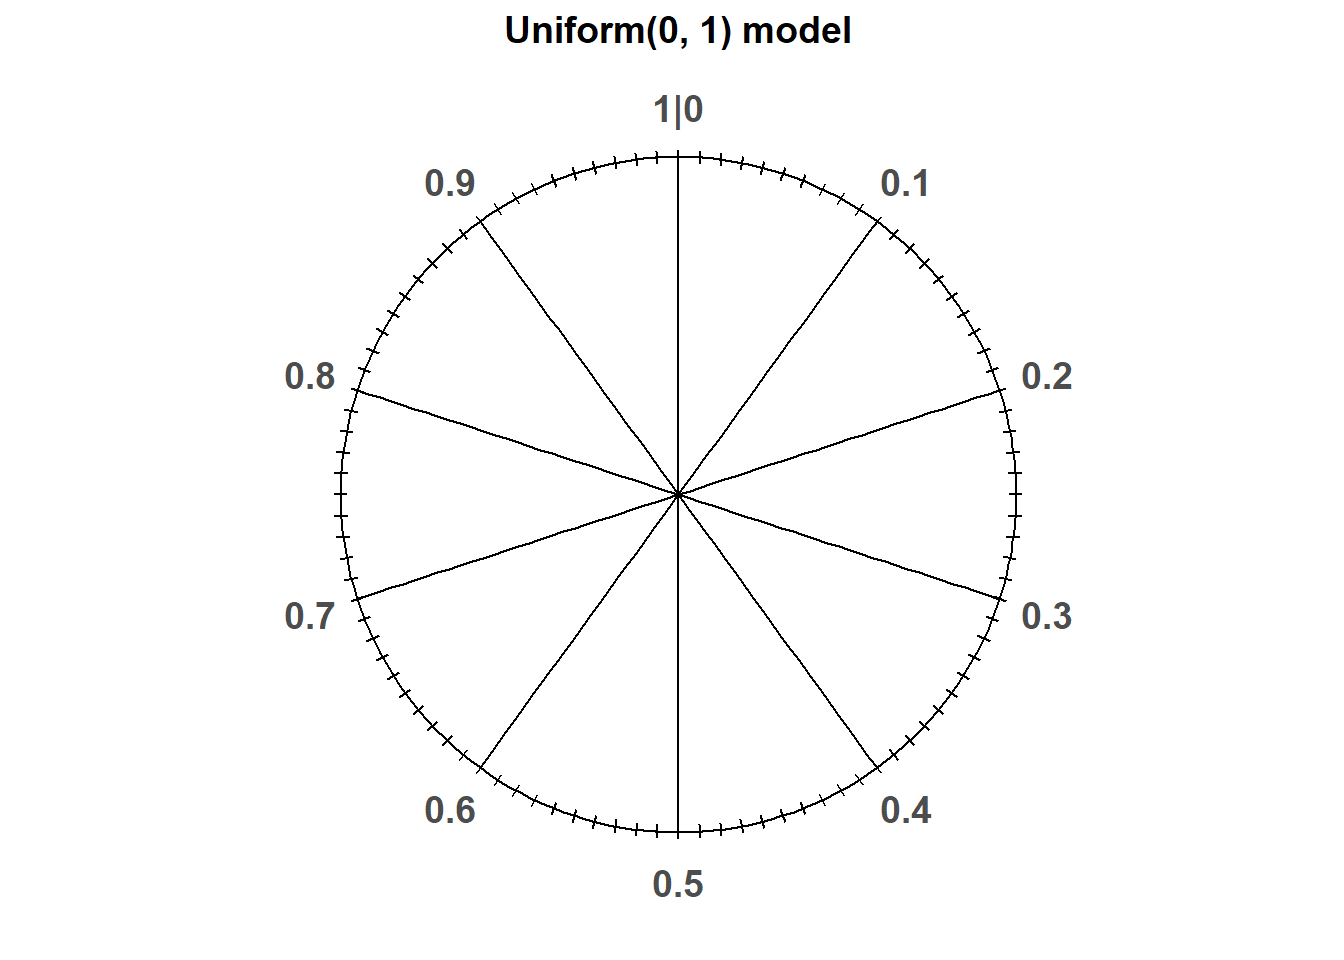 A continuous Uniform(0, 1) spinner. Only selected rounded values are displayed, but in the idealized model the spinner is infinitely precise so that any real number between 0 and 1 is a possible value.